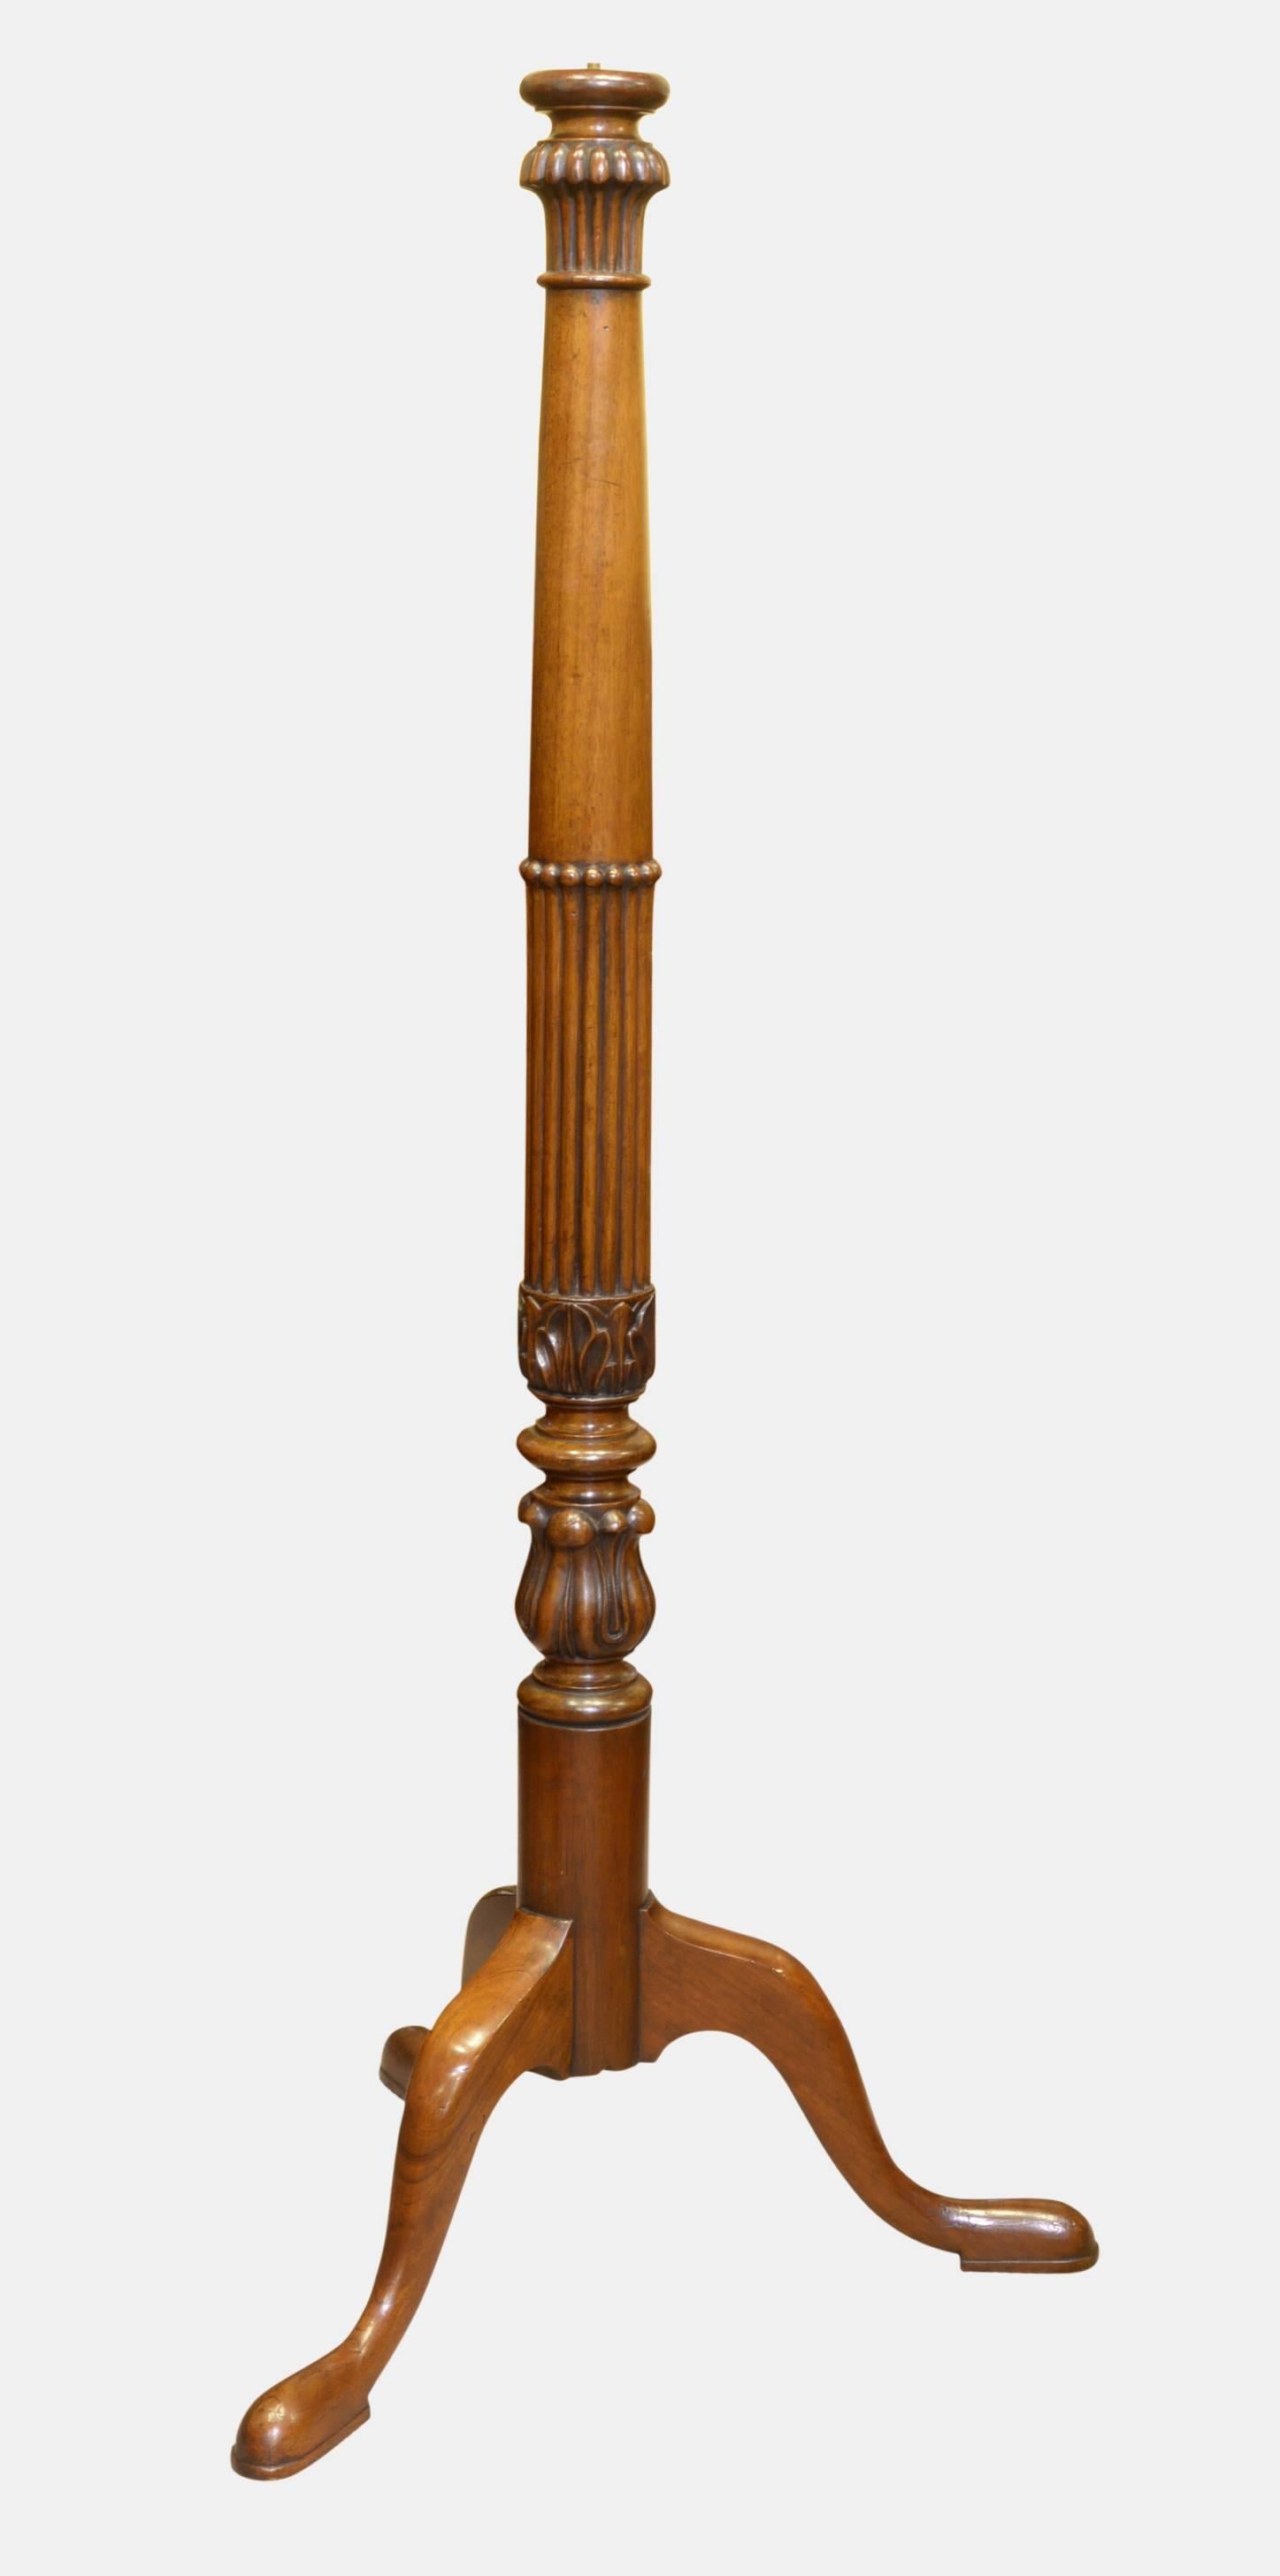 A pair of 19th century mahogany torcheres with boldly colored shafts. Now drilled for electricity,

circa 1870.
Measures:
146 cm (57.5